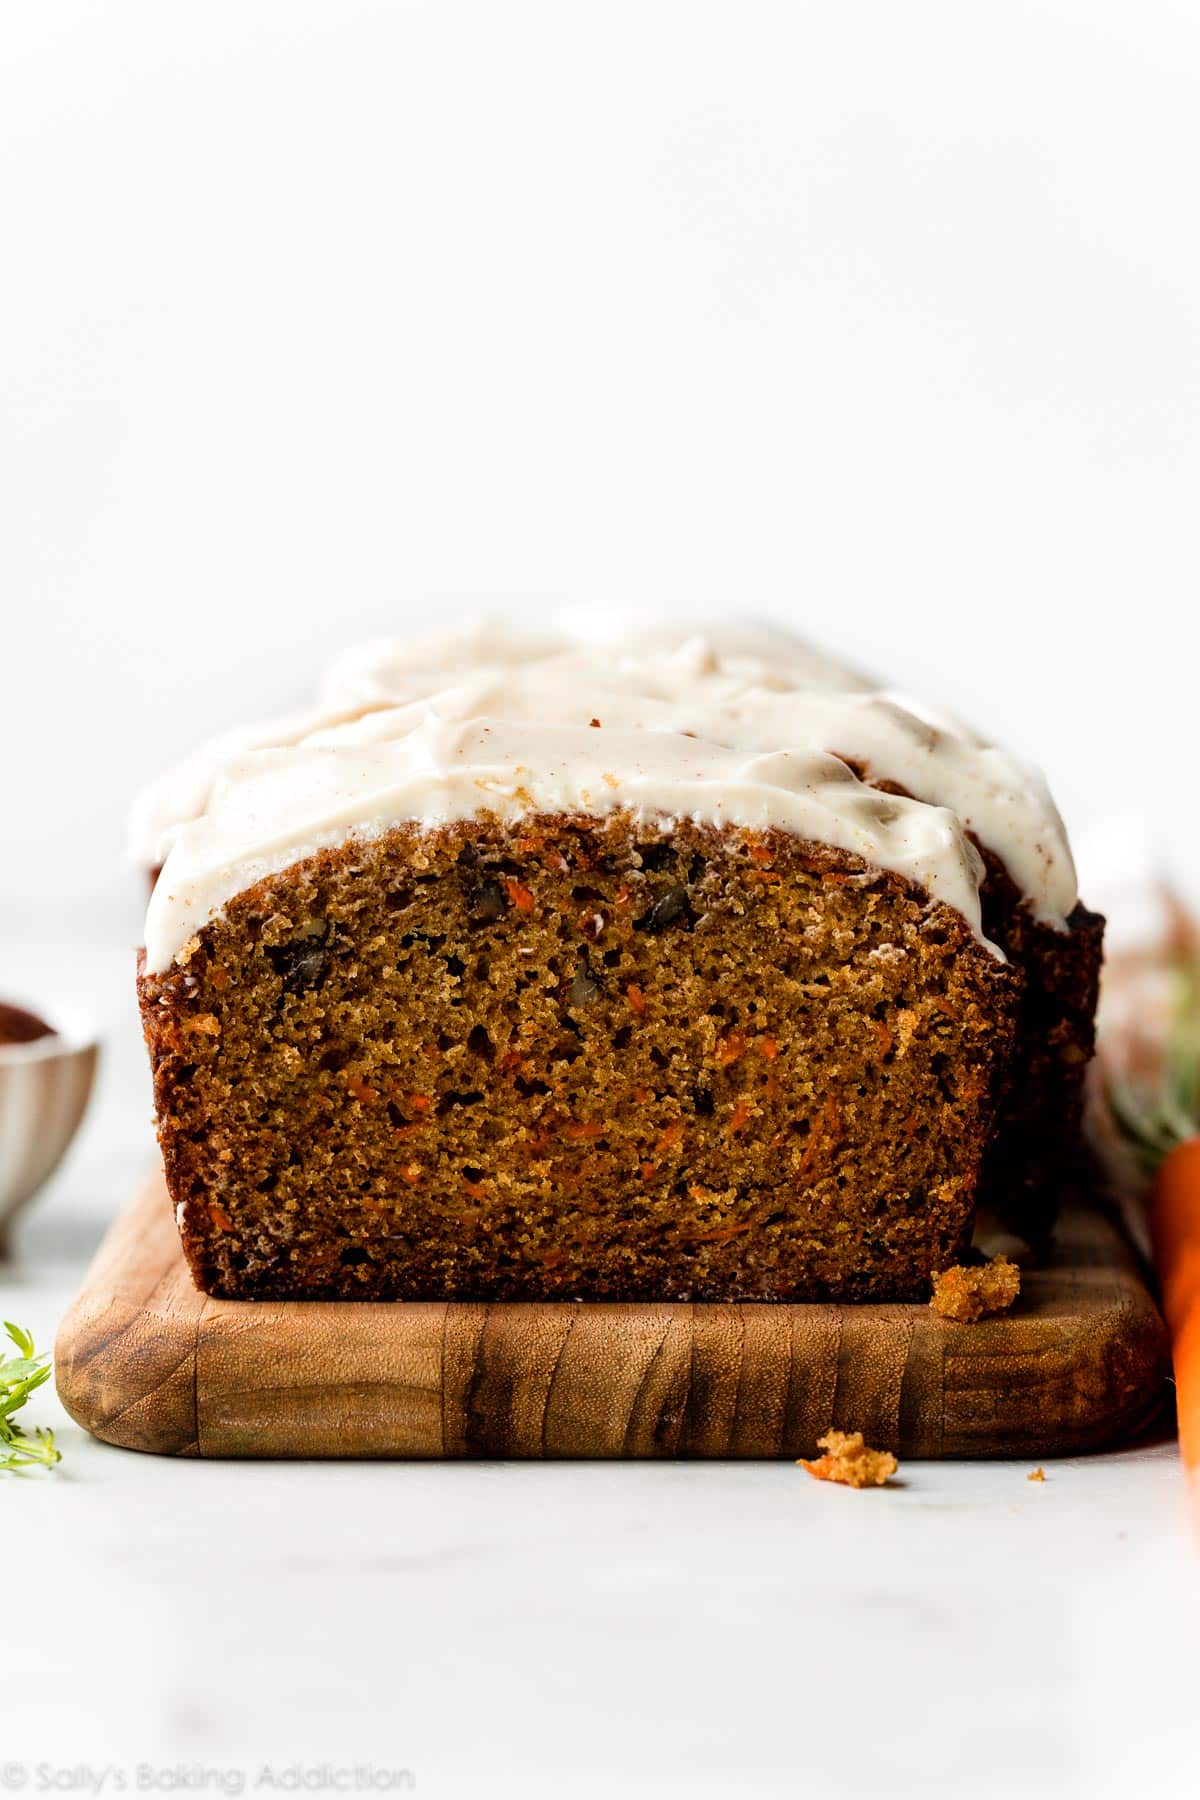 carrot cake bread with cream cheese frosting